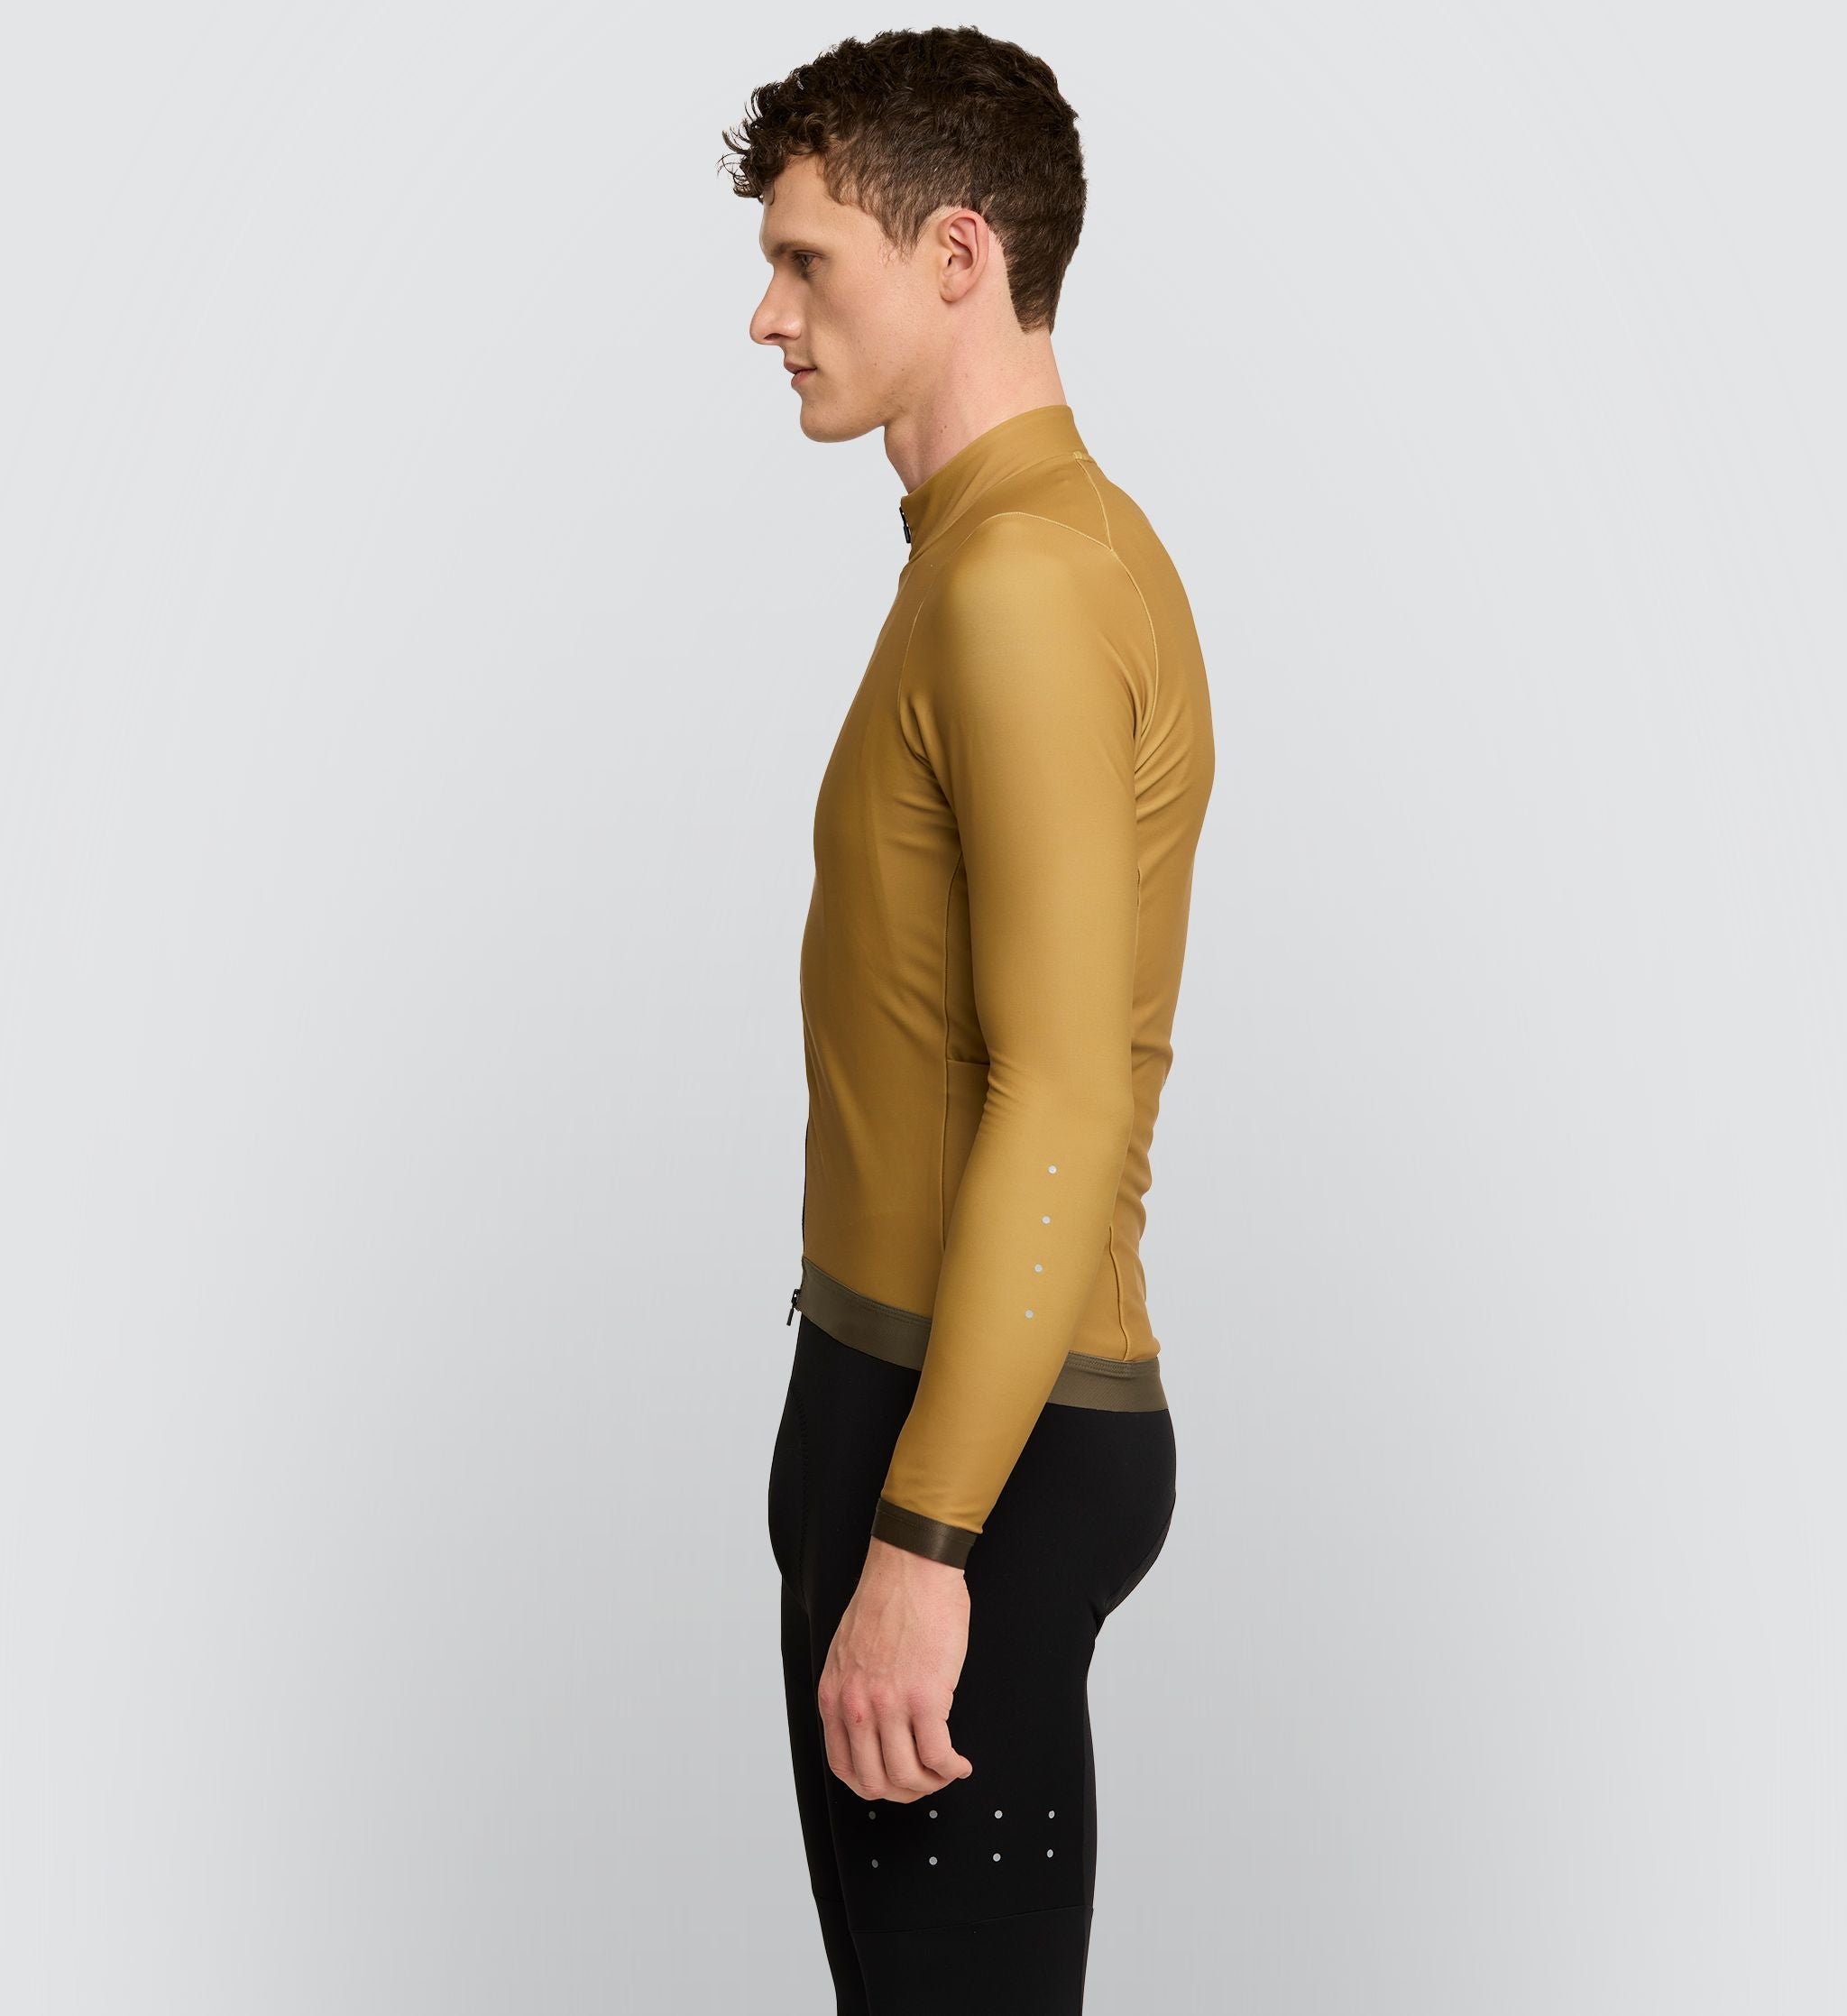 Elements Thermal Long Sleeve Jersey